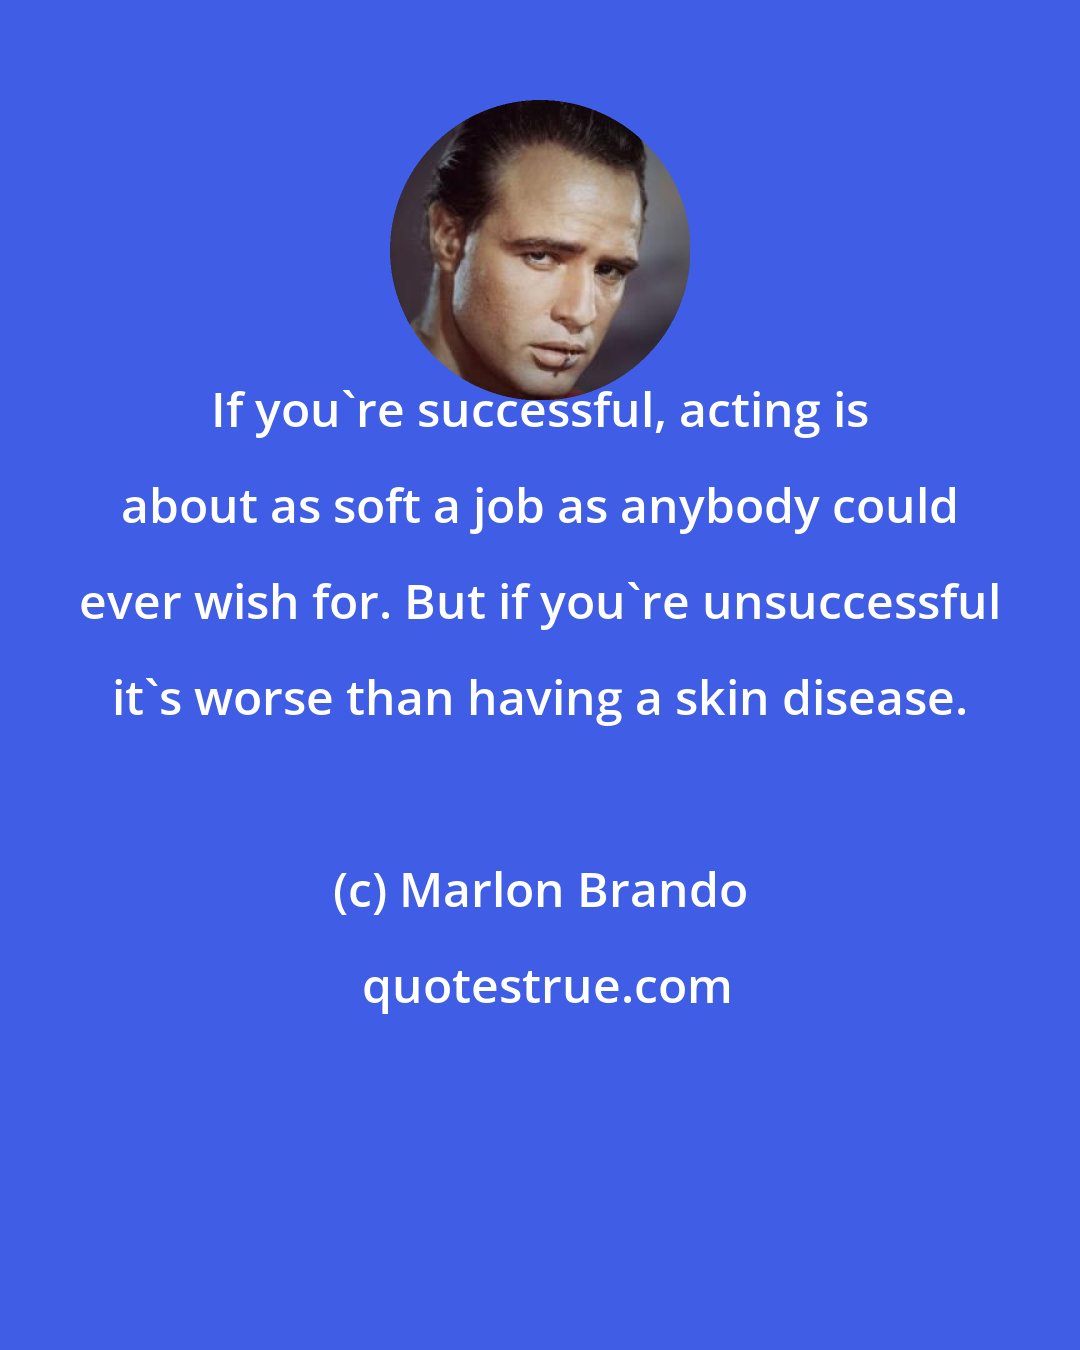 Marlon Brando: If you're successful, acting is about as soft a job as anybody could ever wish for. But if you're unsuccessful it's worse than having a skin disease.